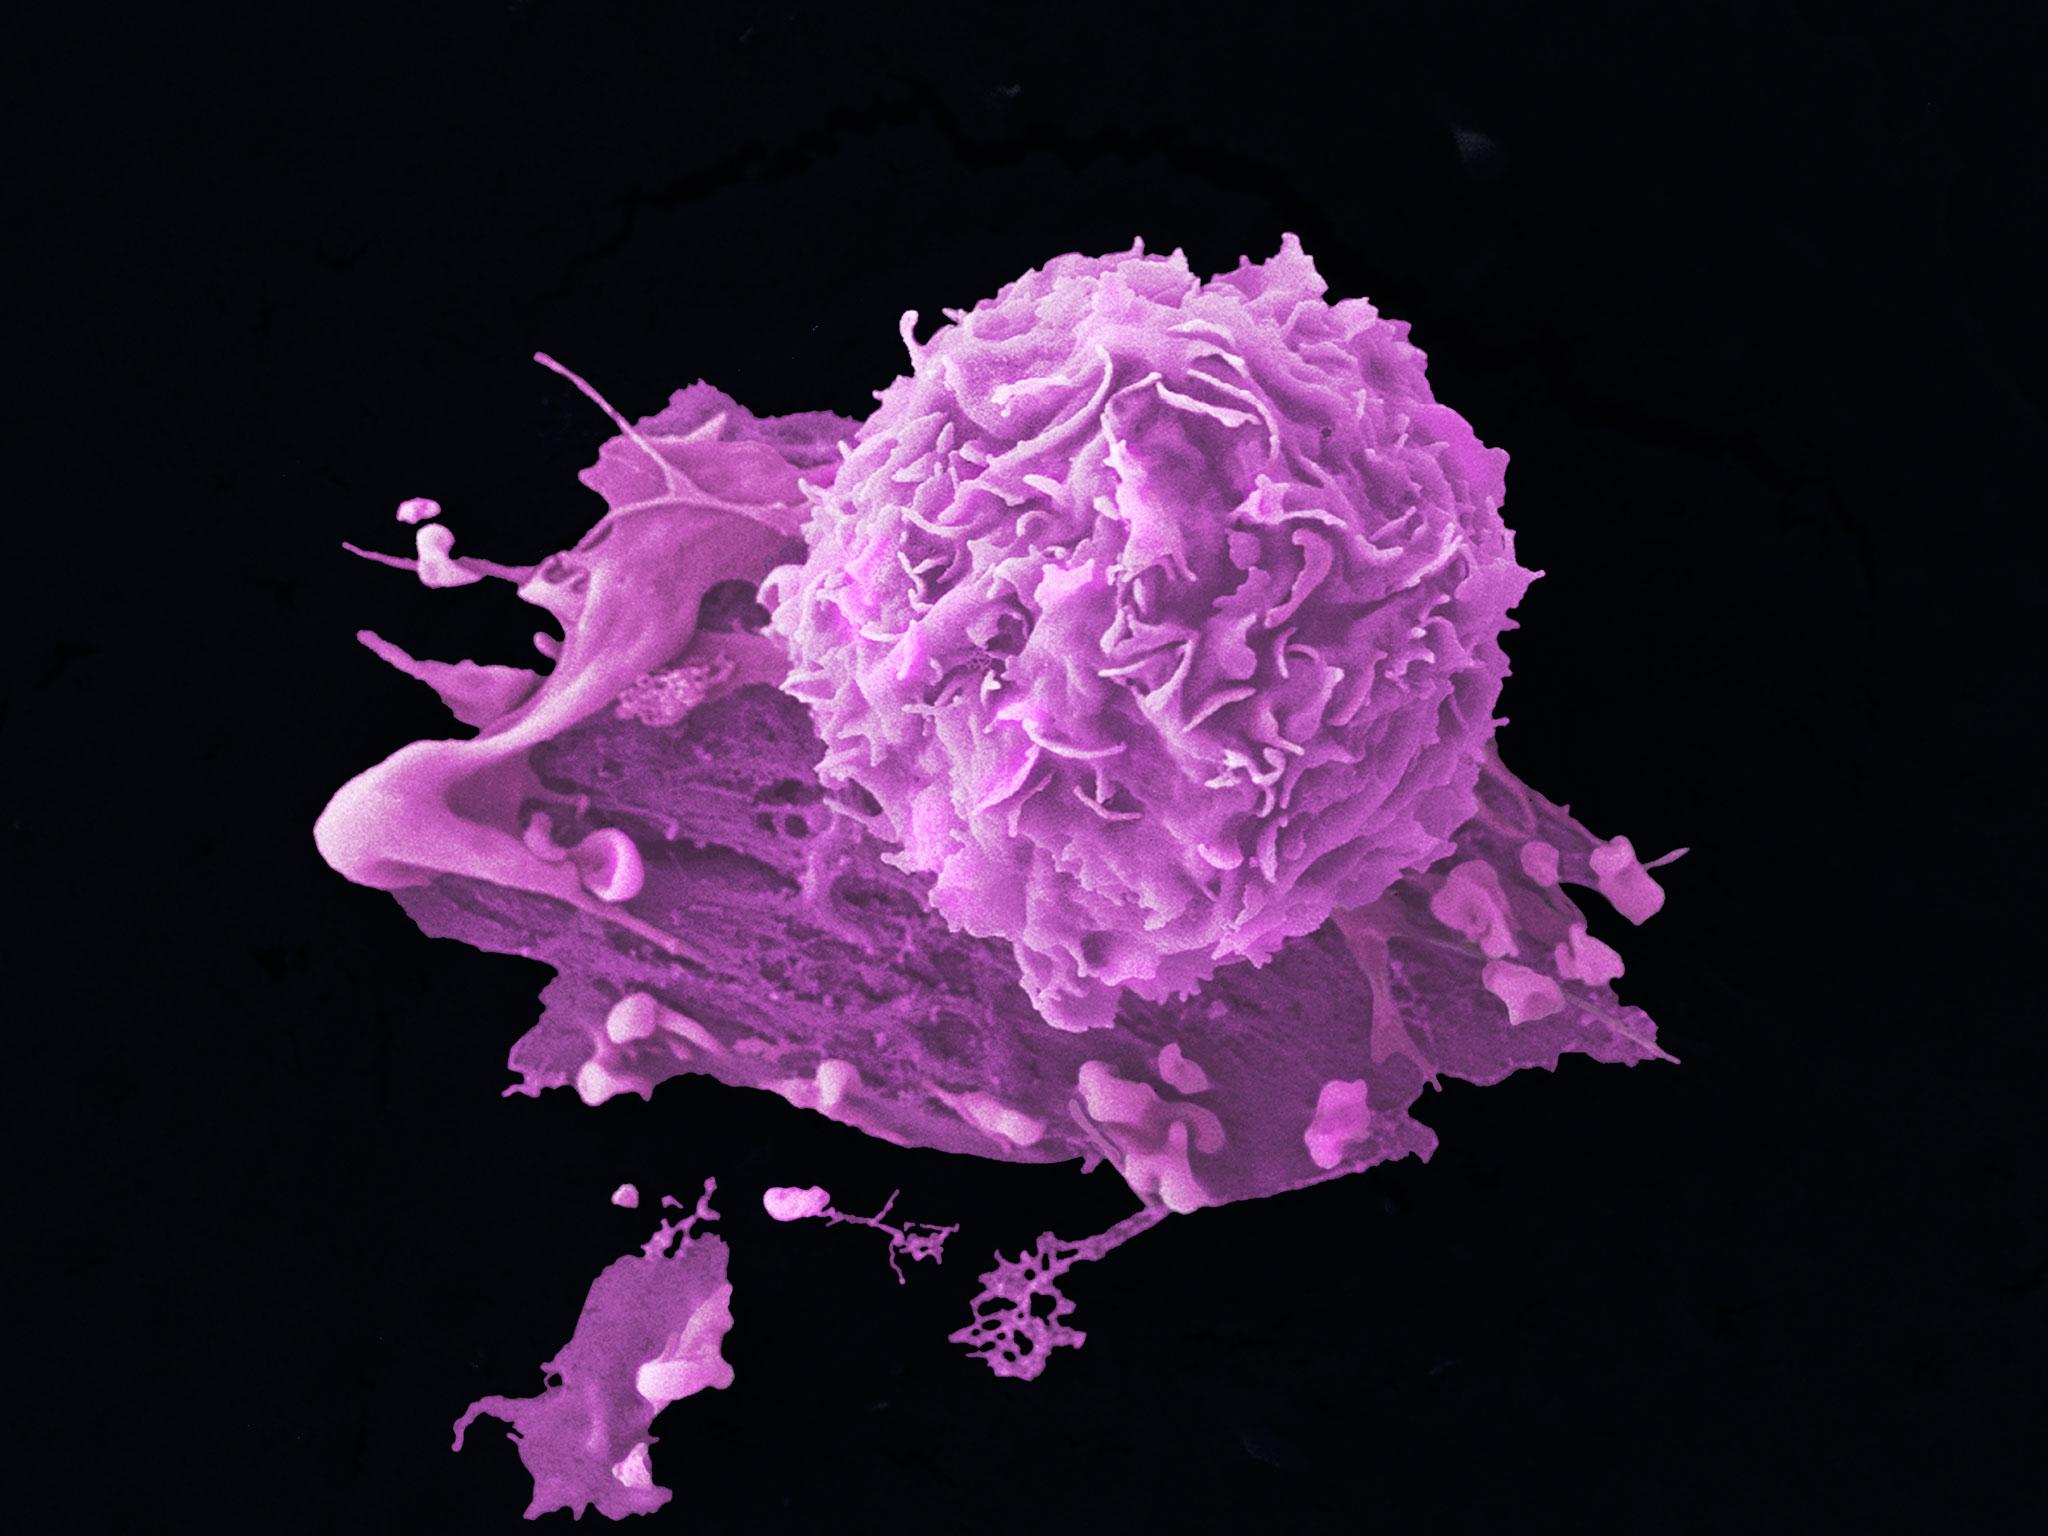 The breast cancer cell